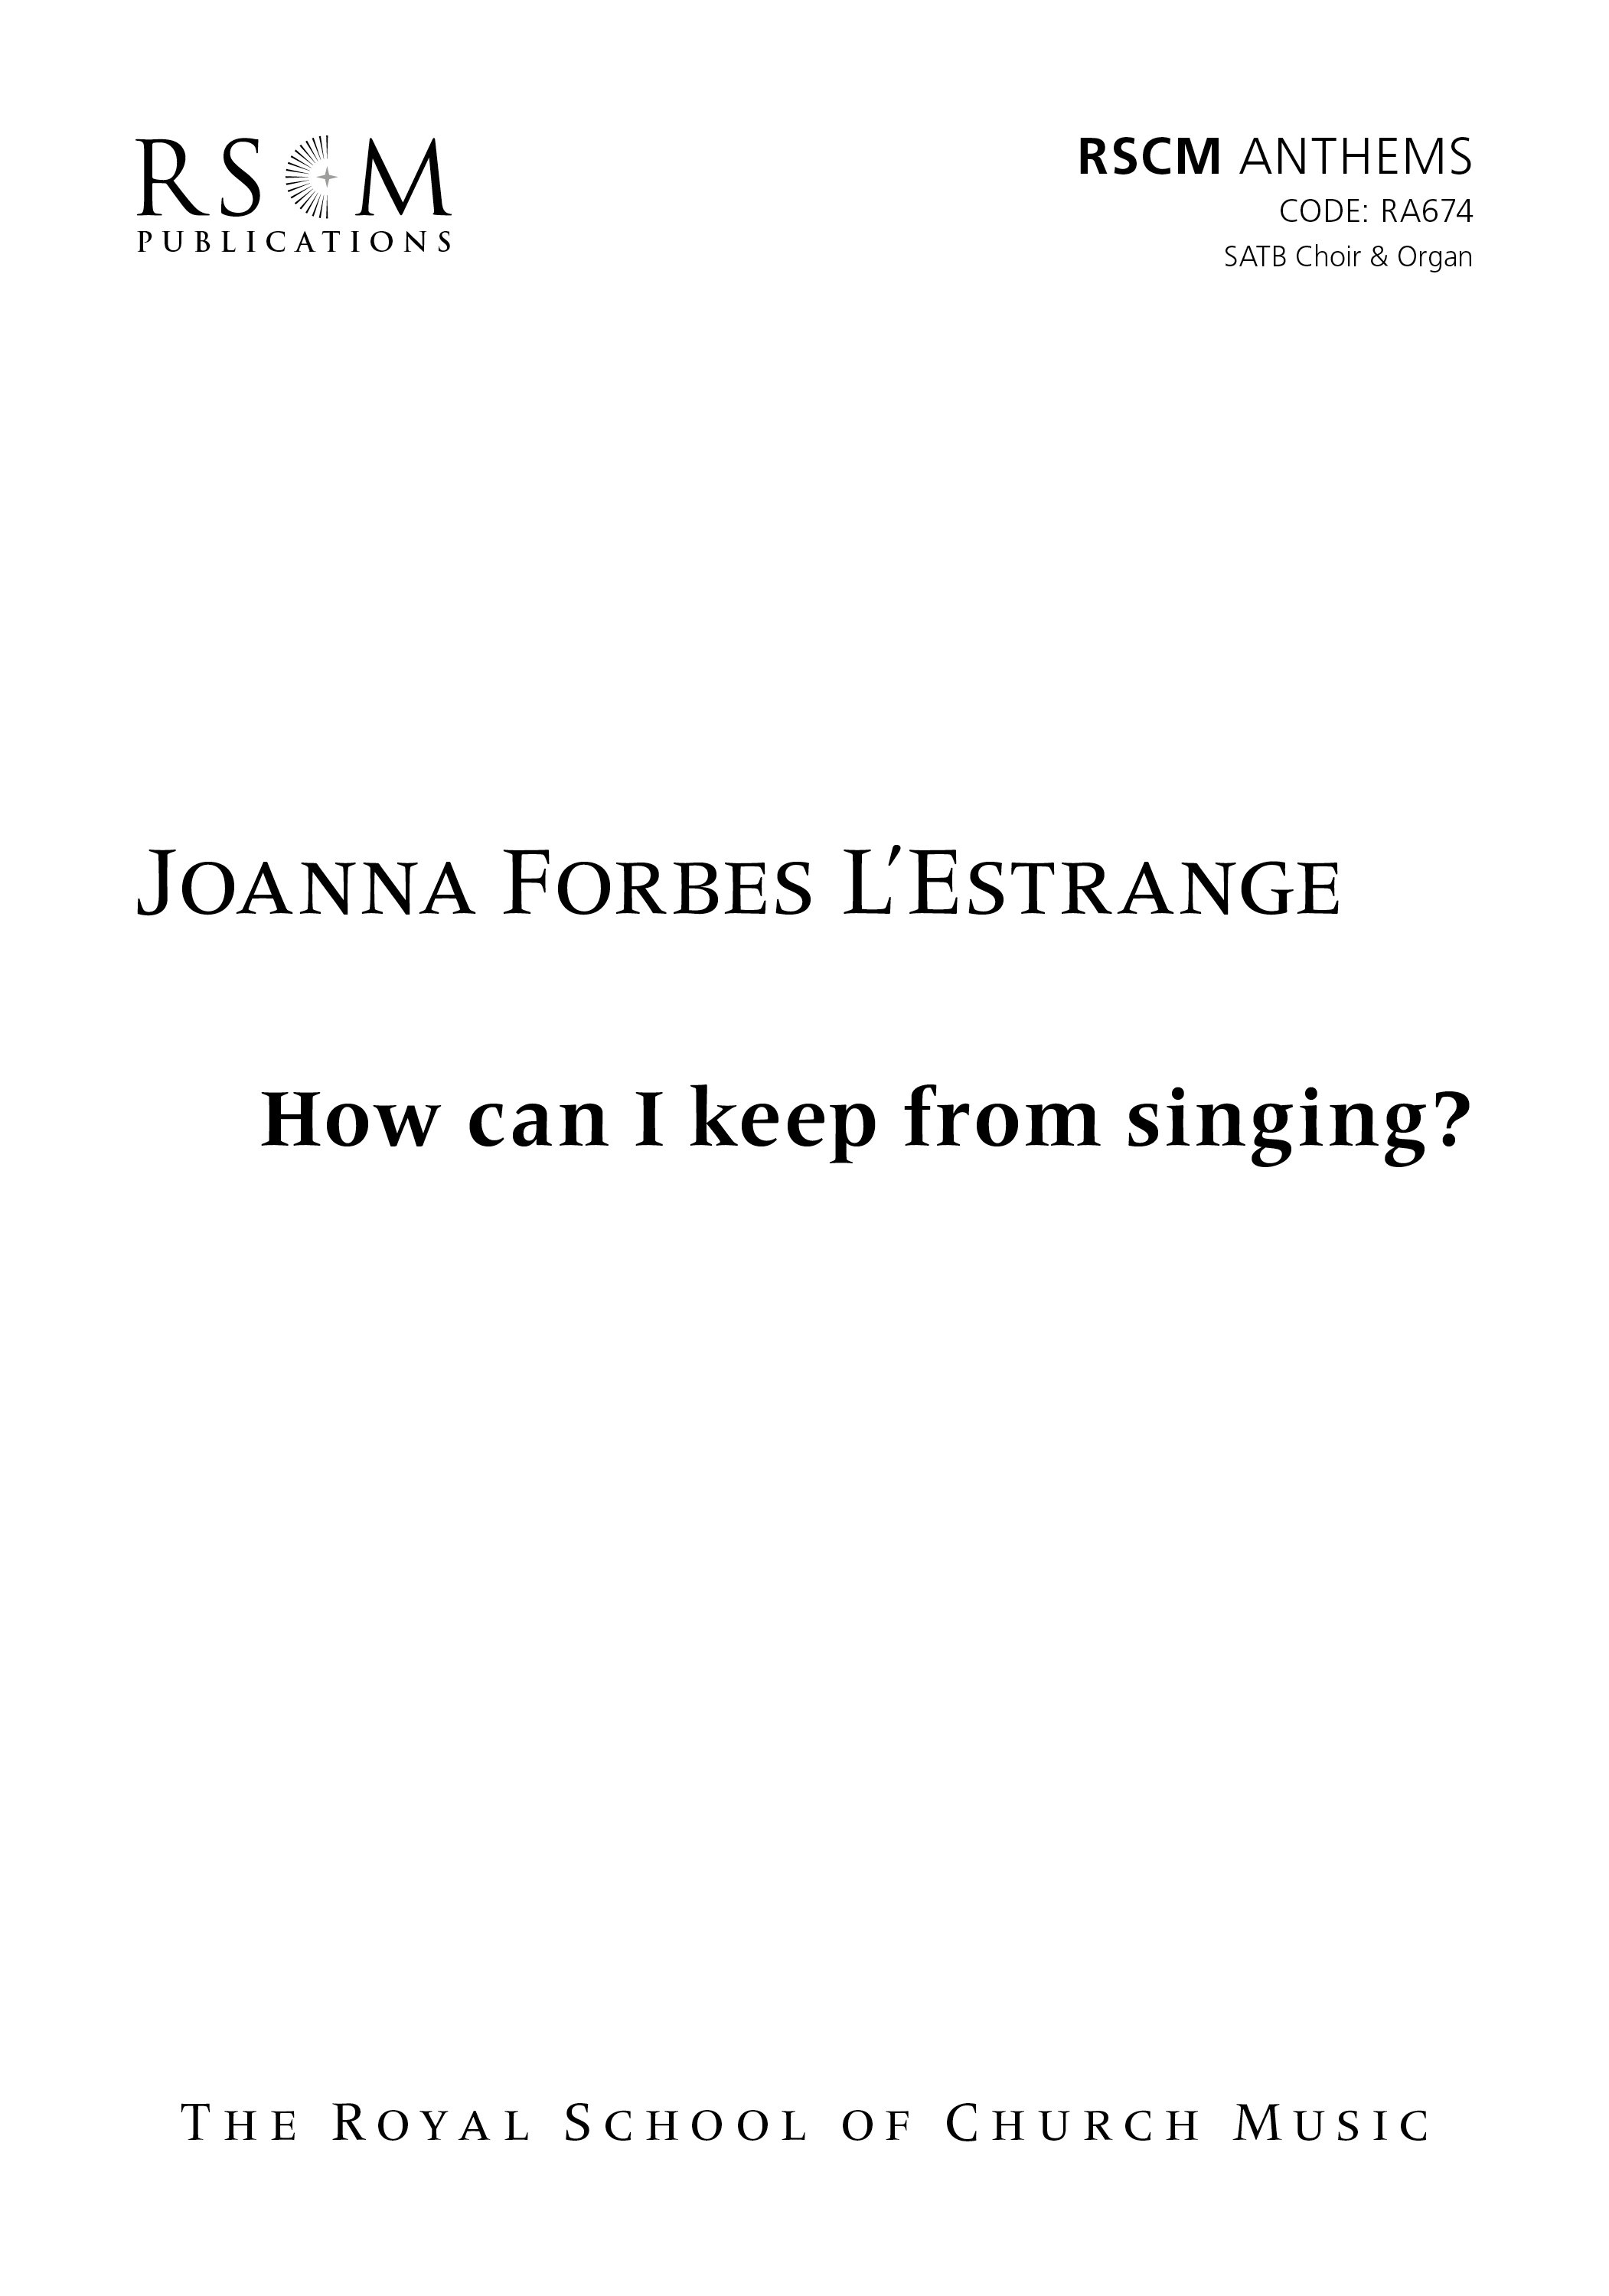 How Can I Keep From Singing? by Joanna Forbes L'Estrange